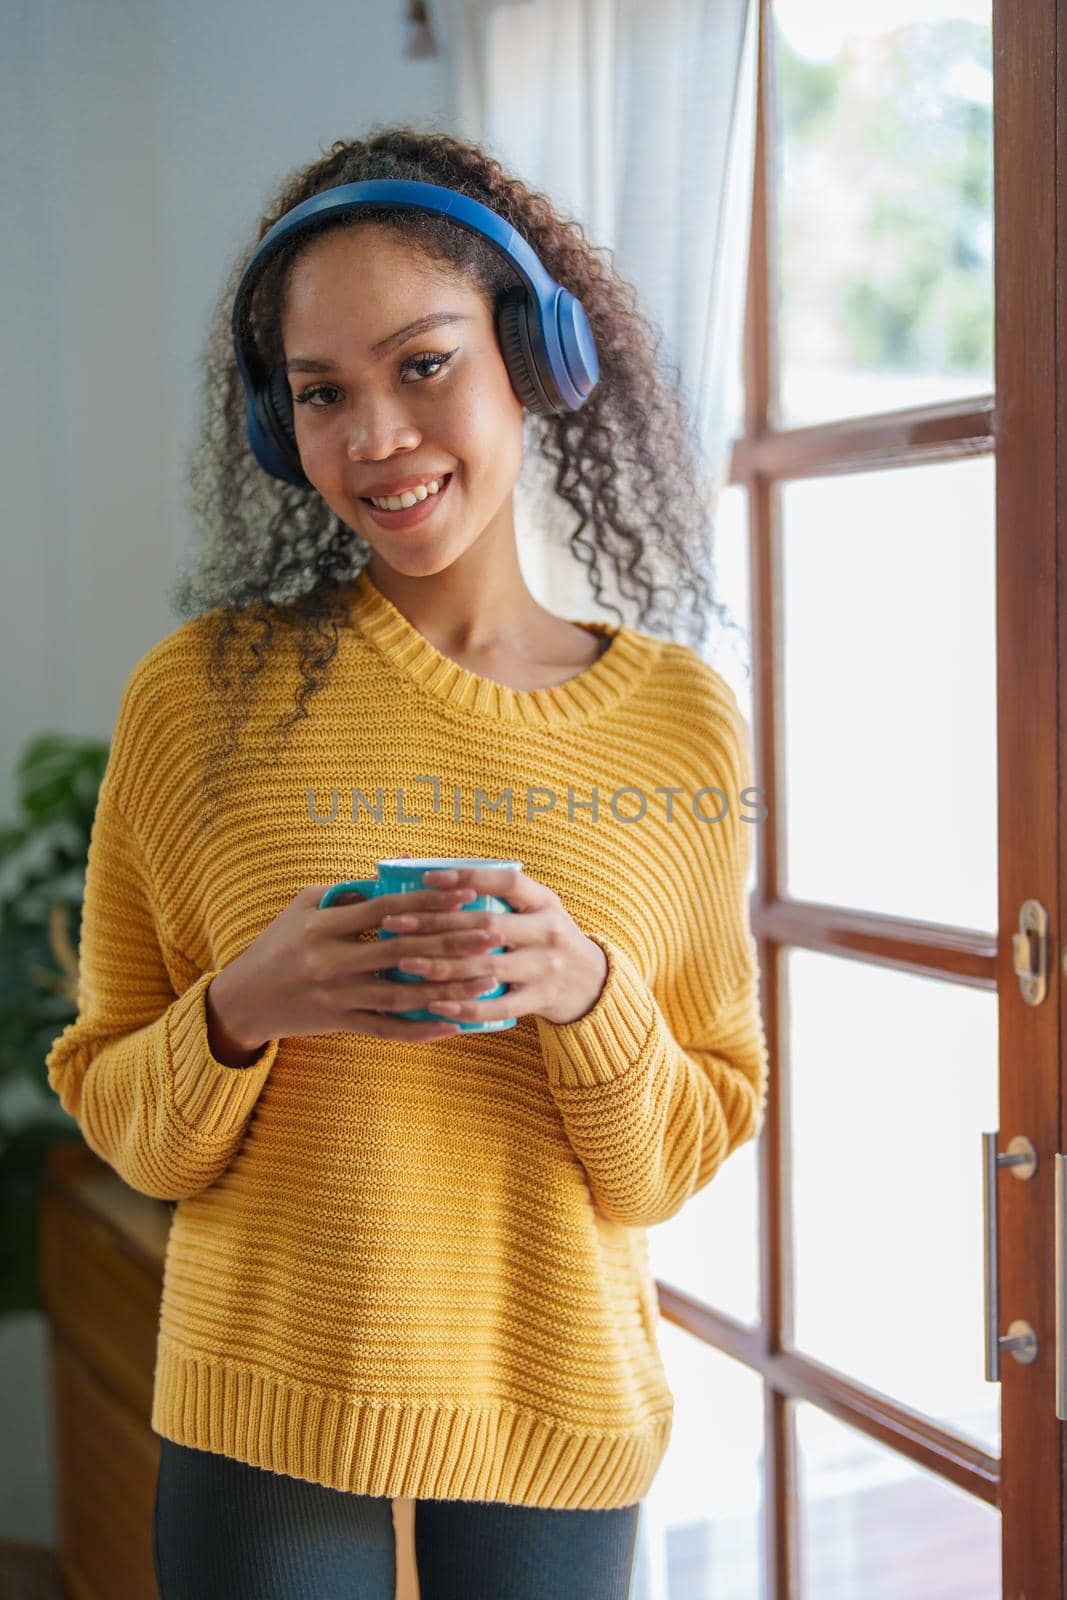 African American wearing headphones and holding coffee mugs smiling happily by Manastrong